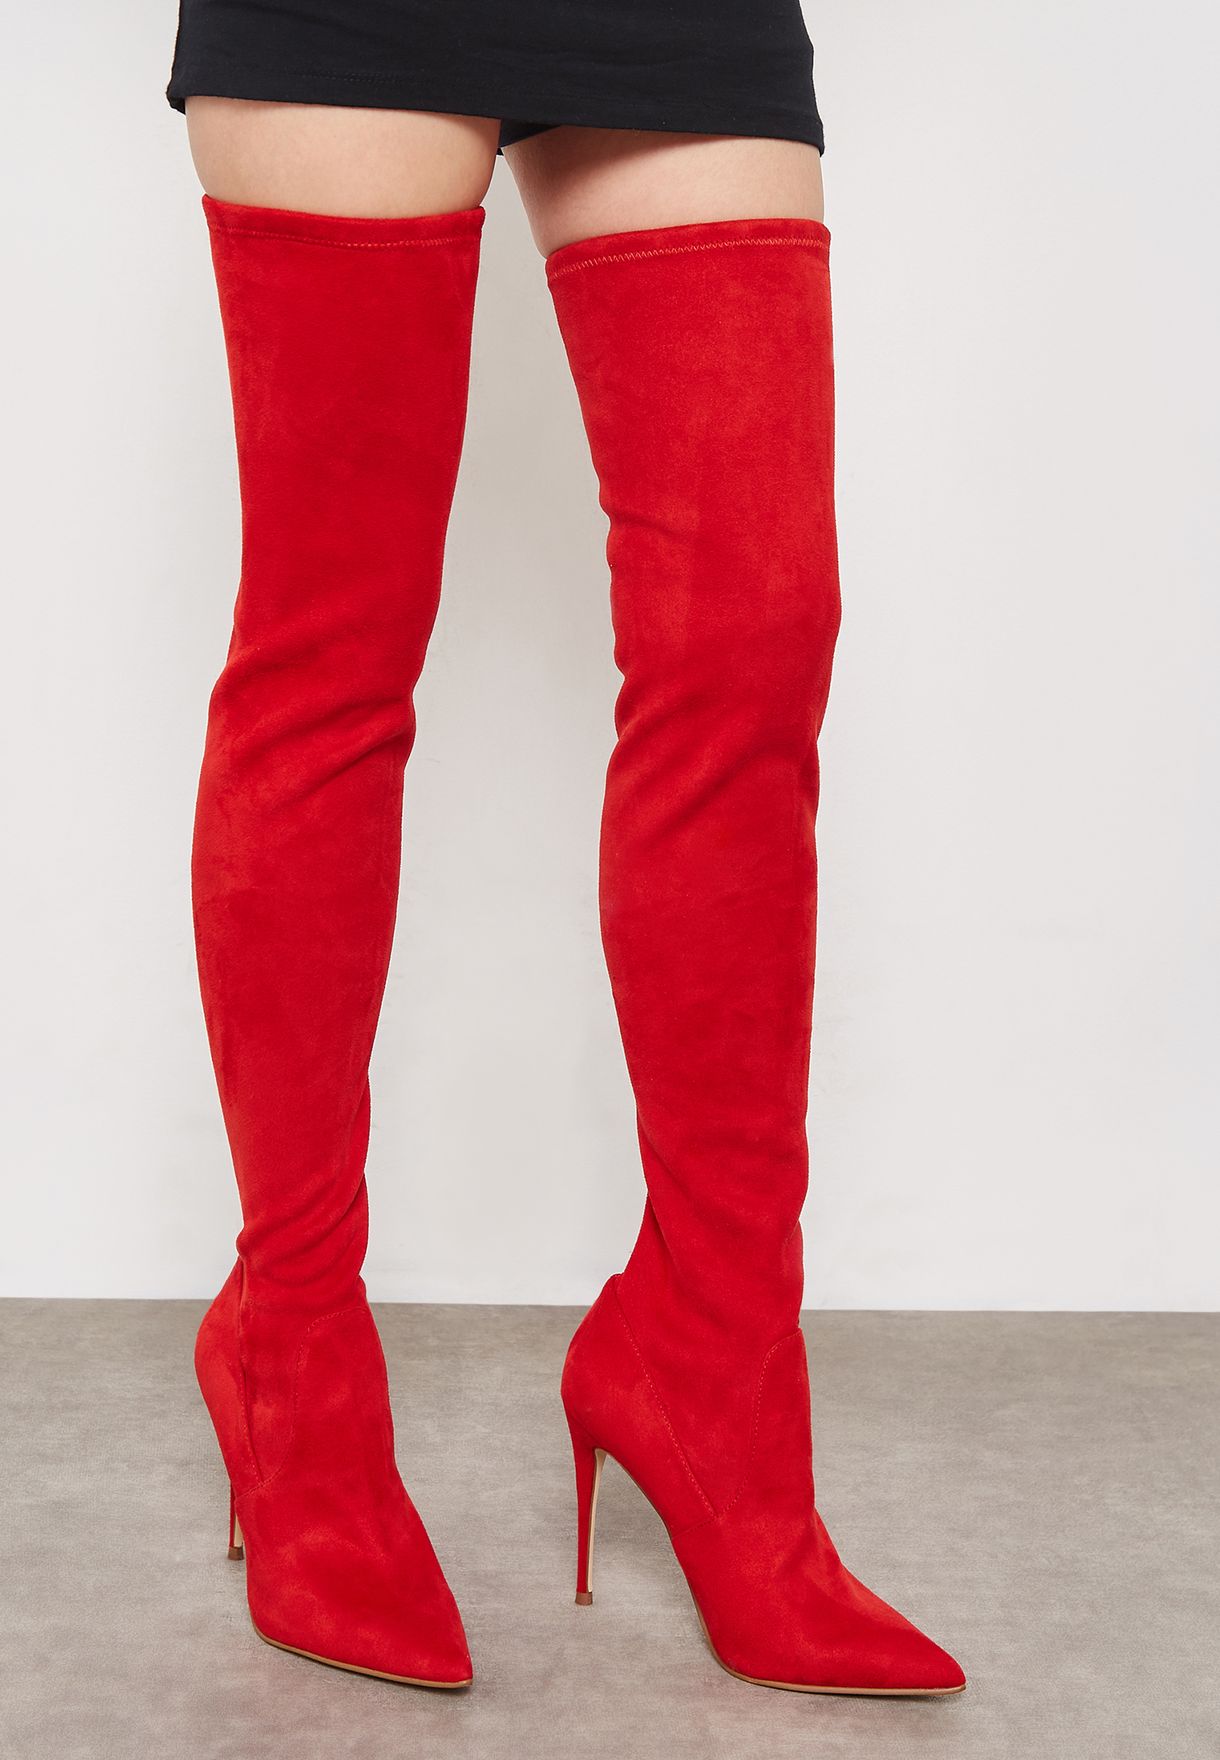 steve madden red lace boots